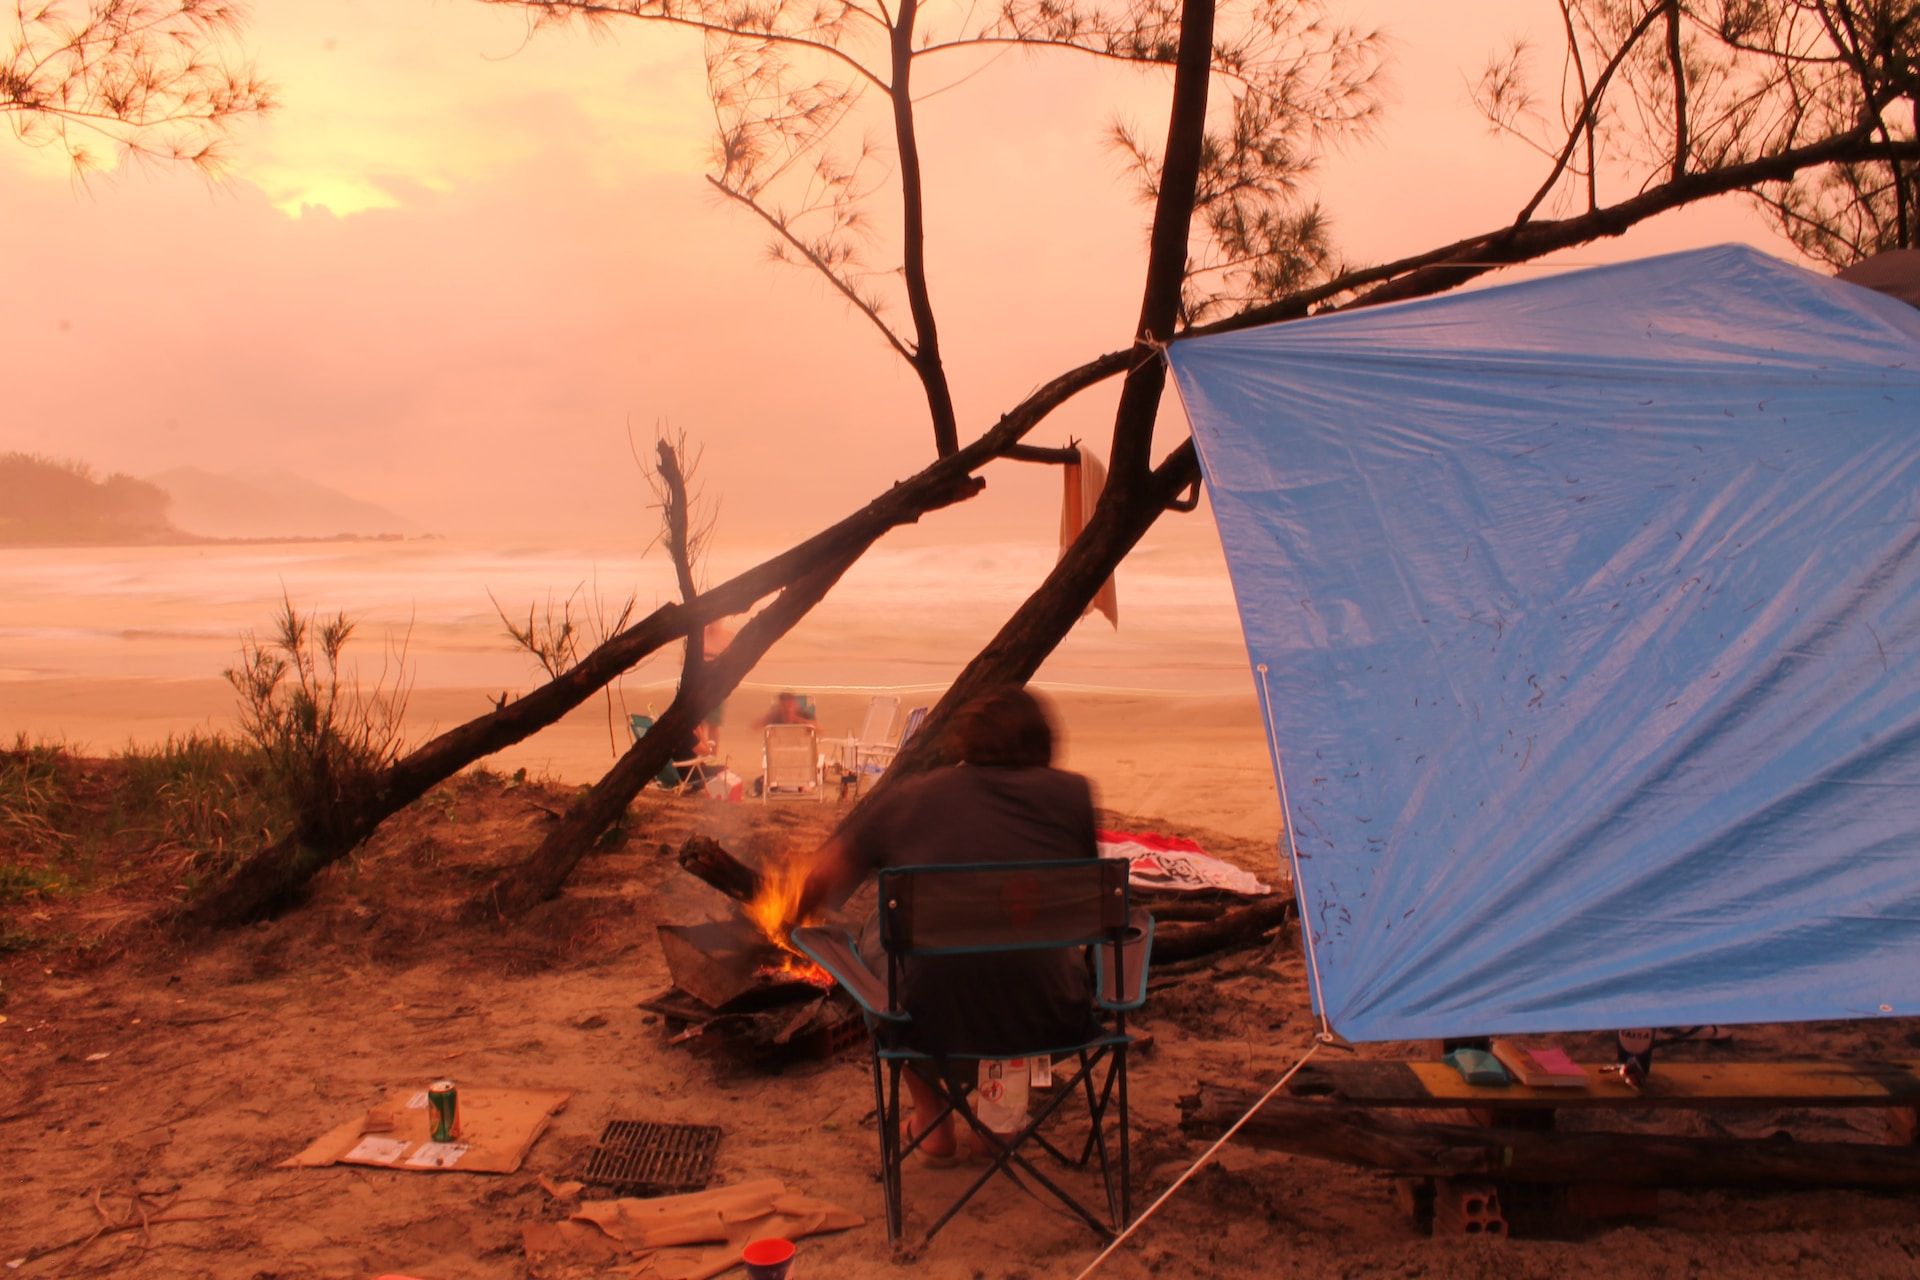 Tarp while camping on the beach